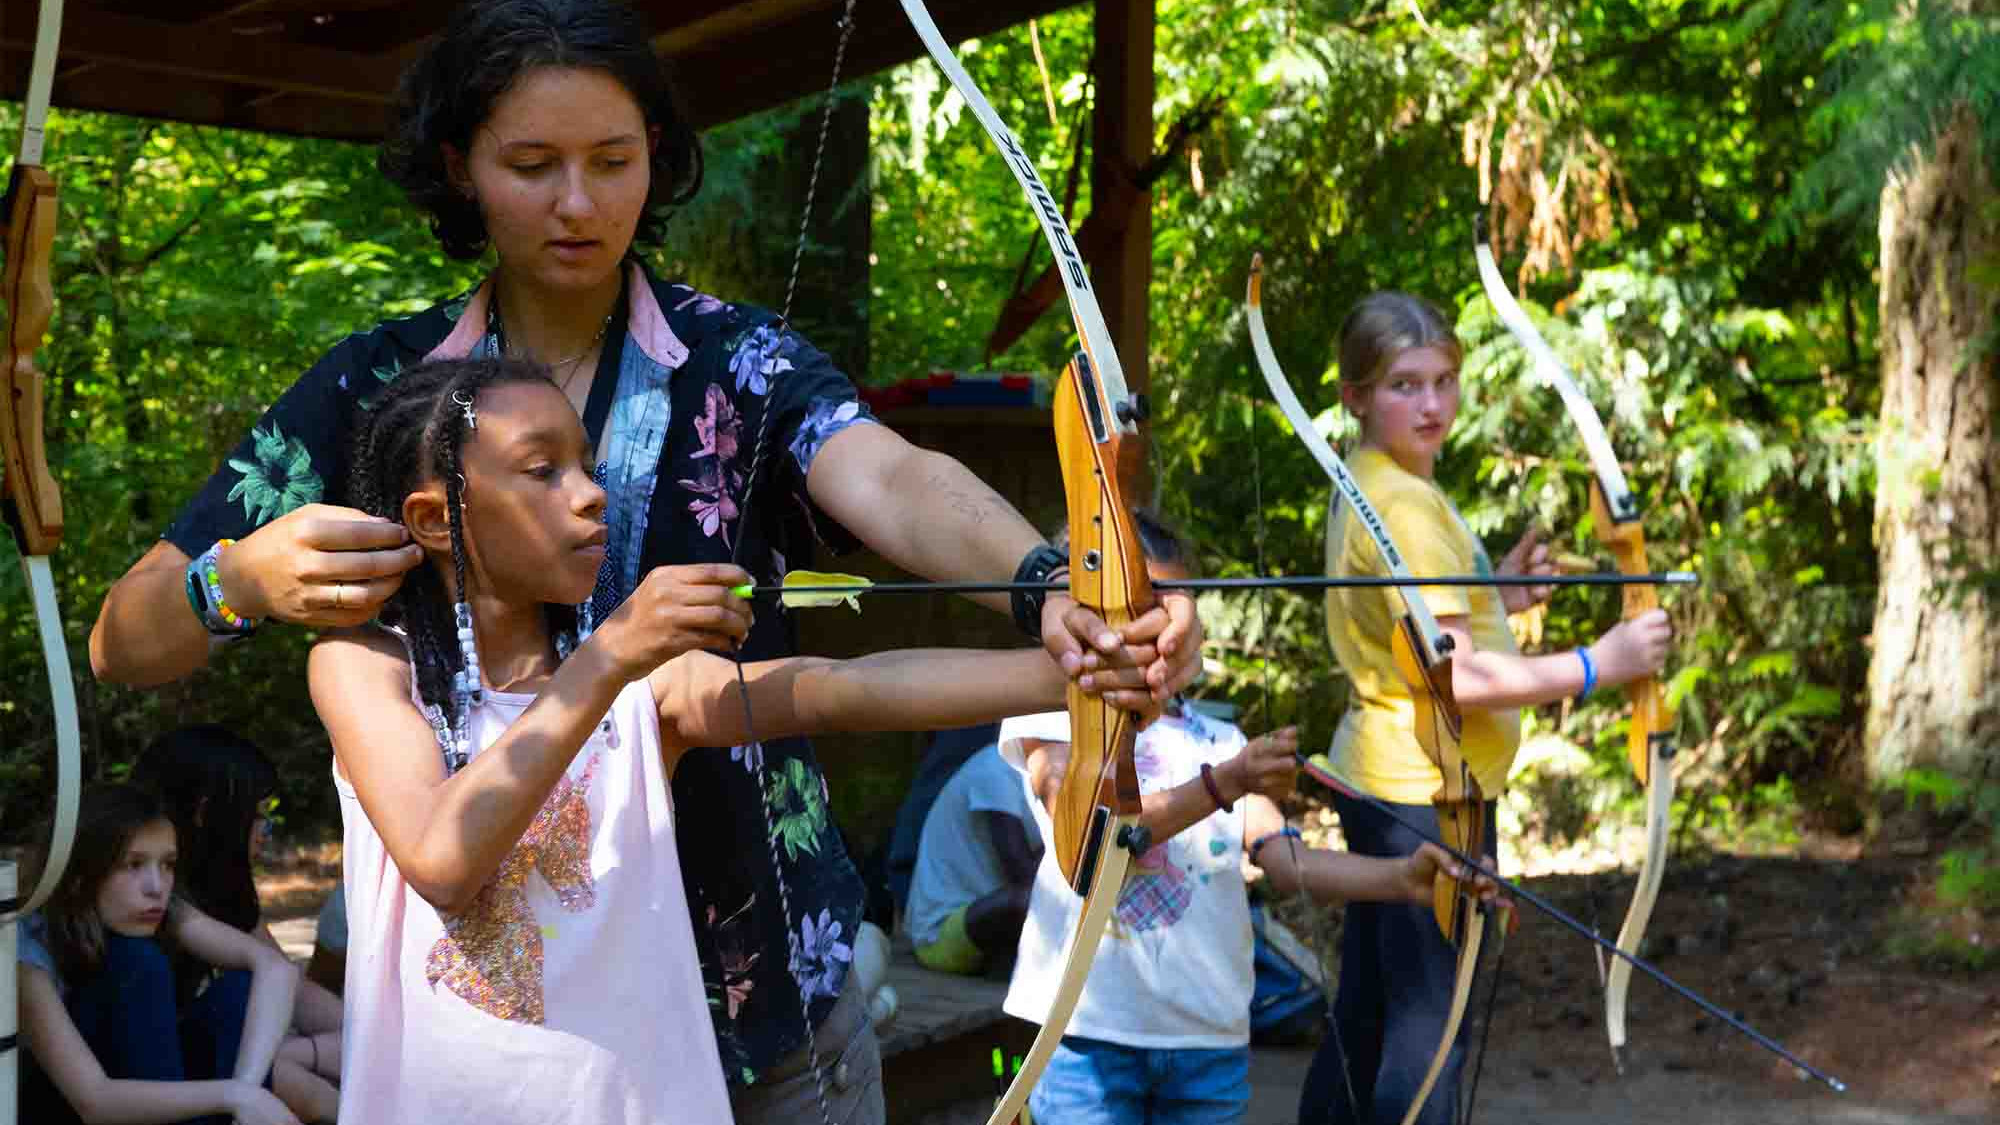 CRISTA Camps Activities - Young Girl Learning Archery